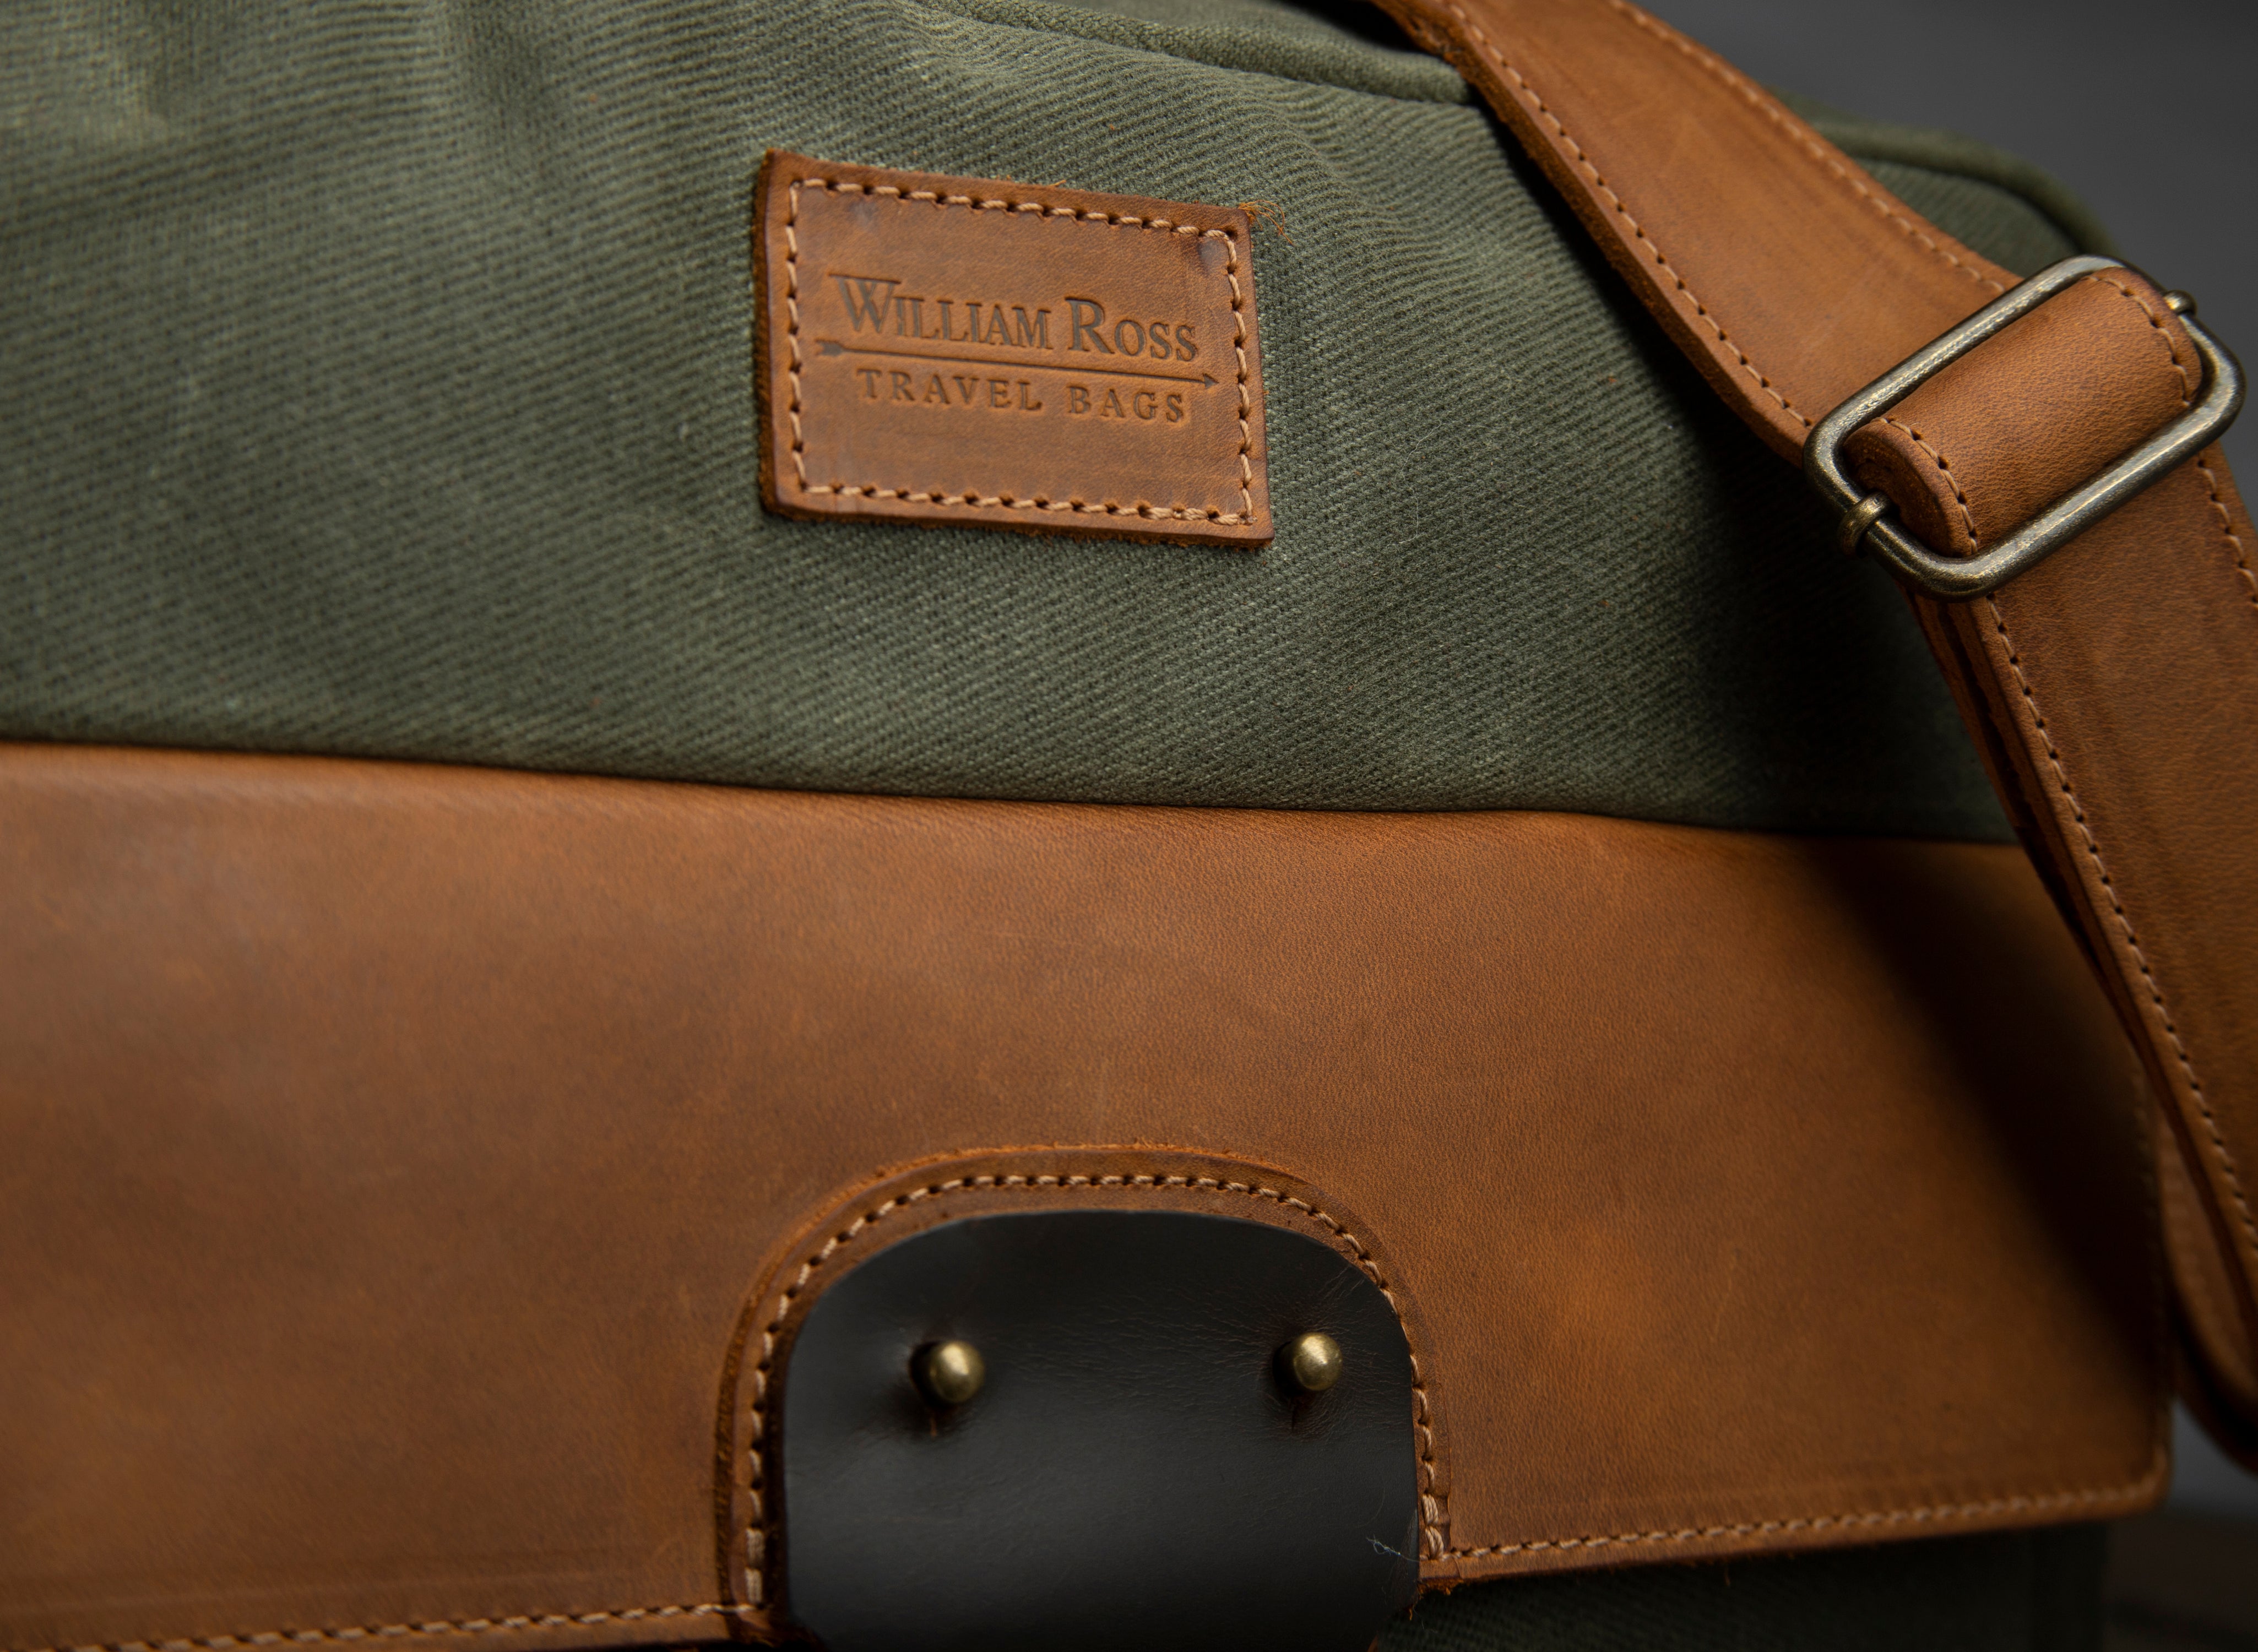 Voyage Messenger Bag - Luxury Leather Bags Selection - Bags